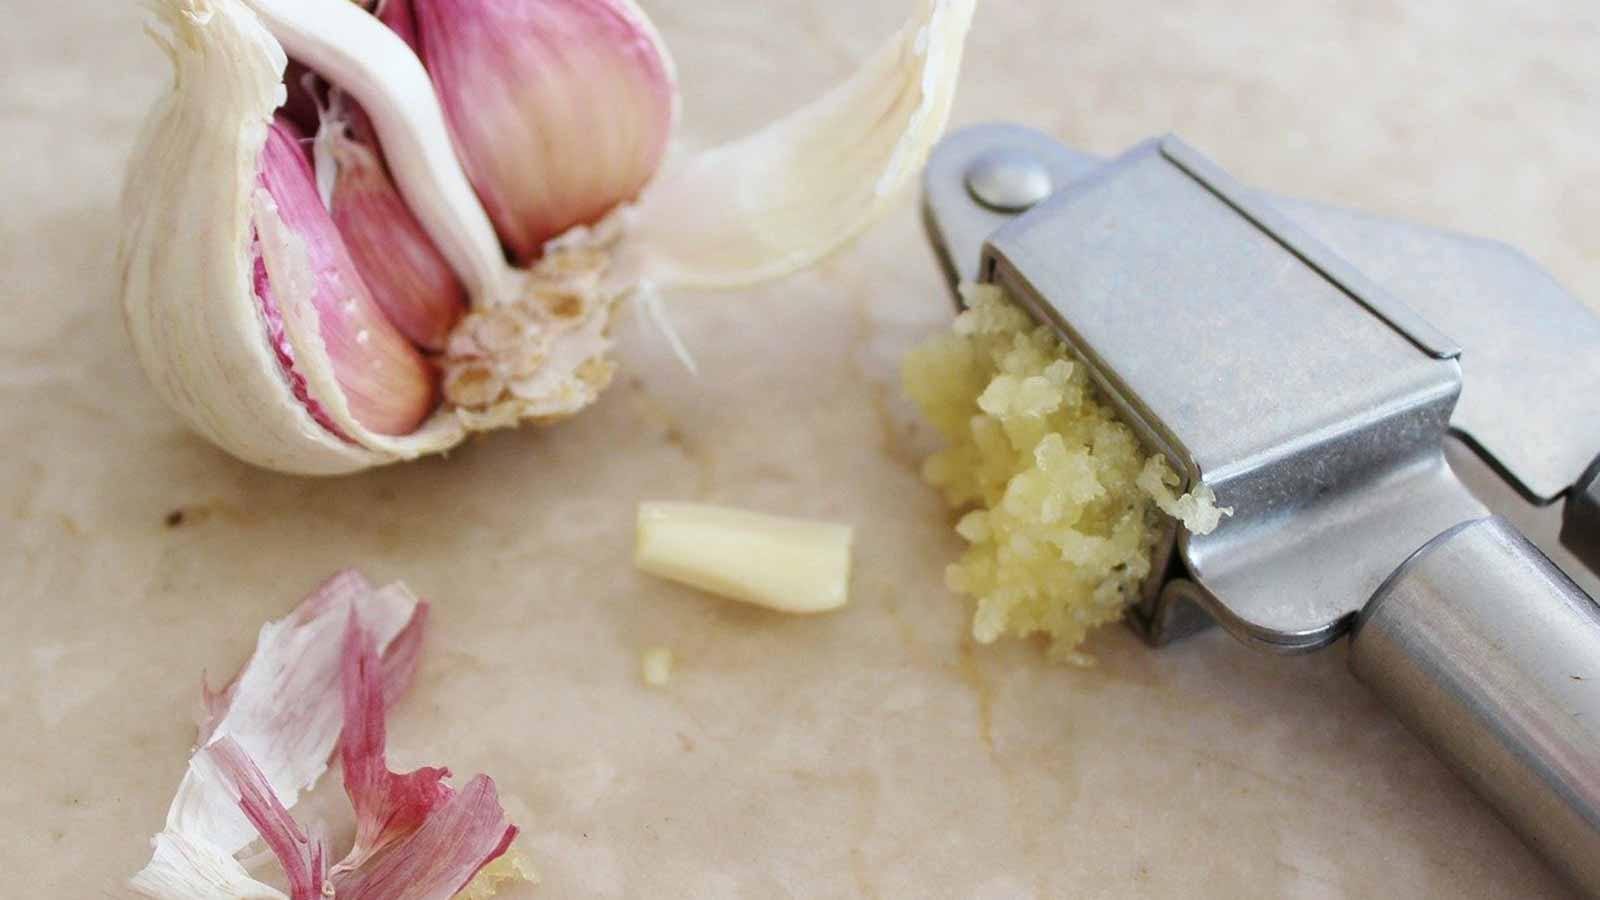 How to Mince Garlic with a Knife, Garlic Press, Grater or Food